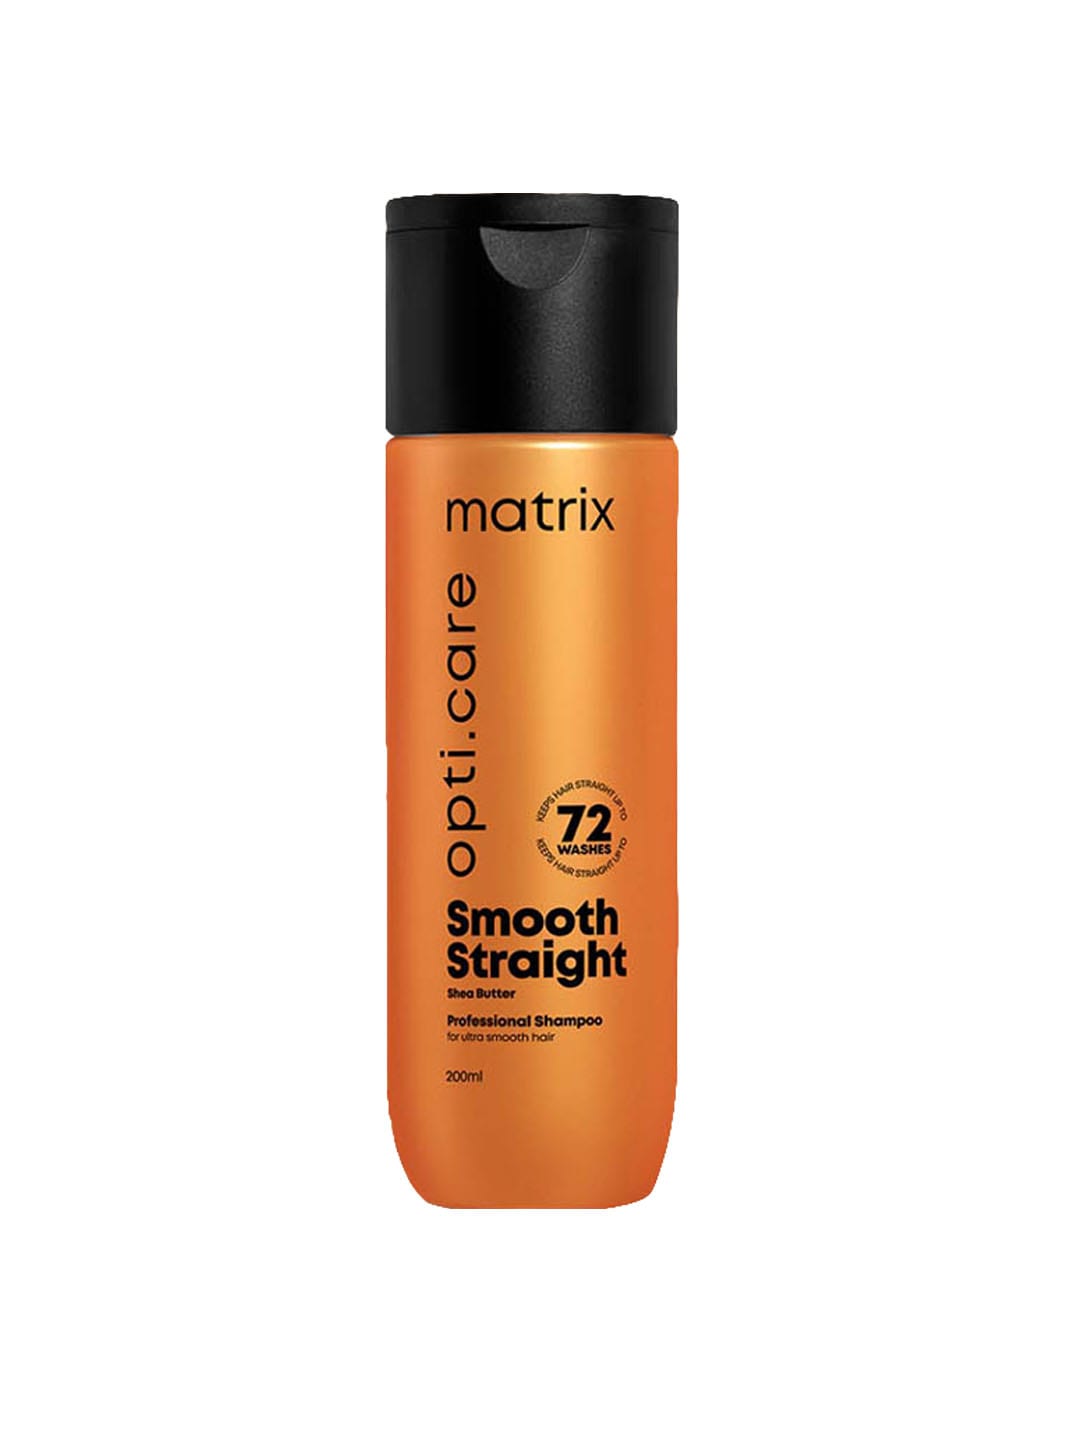 MATRIX Opti Care Smooth Straight Professional Ultra Smoothing Shea Butter Shampoo 200 ml Price in India